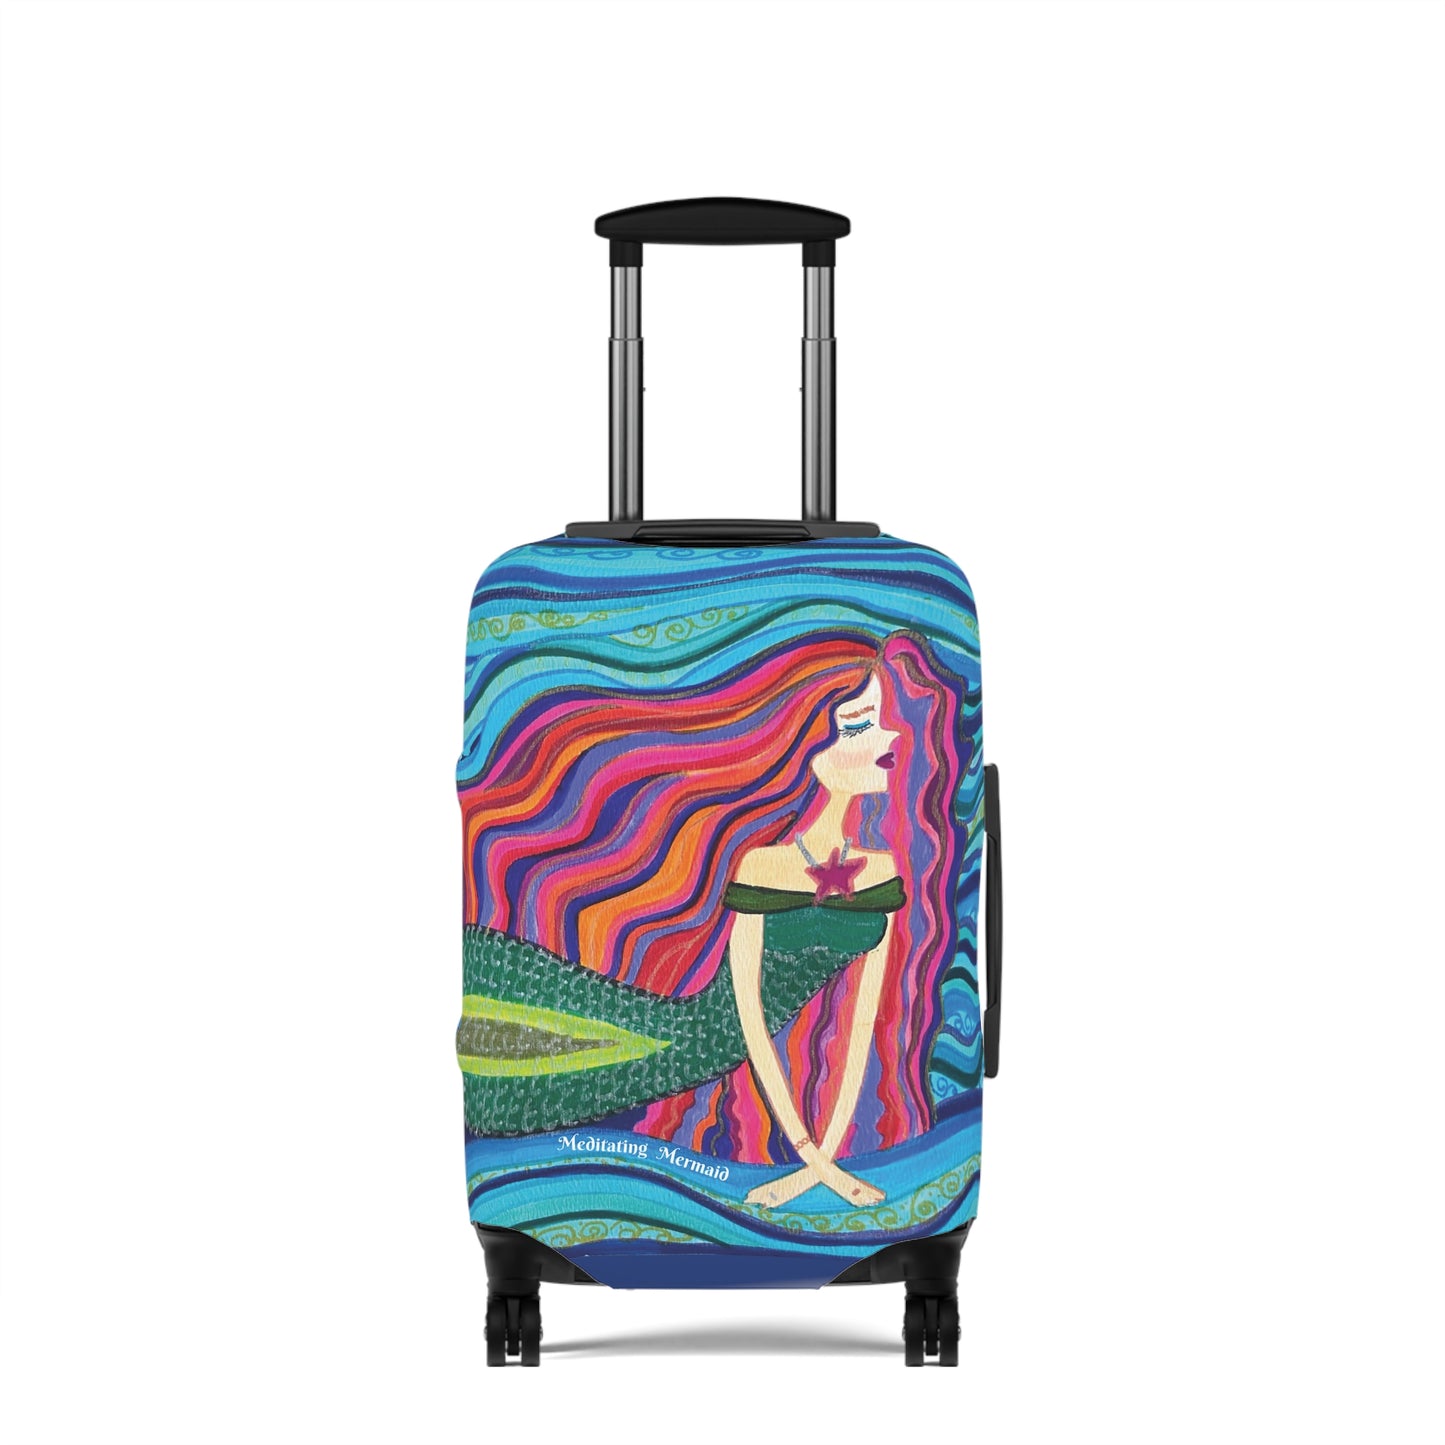 Meditating MERMAID Luggage Cover - Perfect Gift For Mermaid And Meditation Lovers